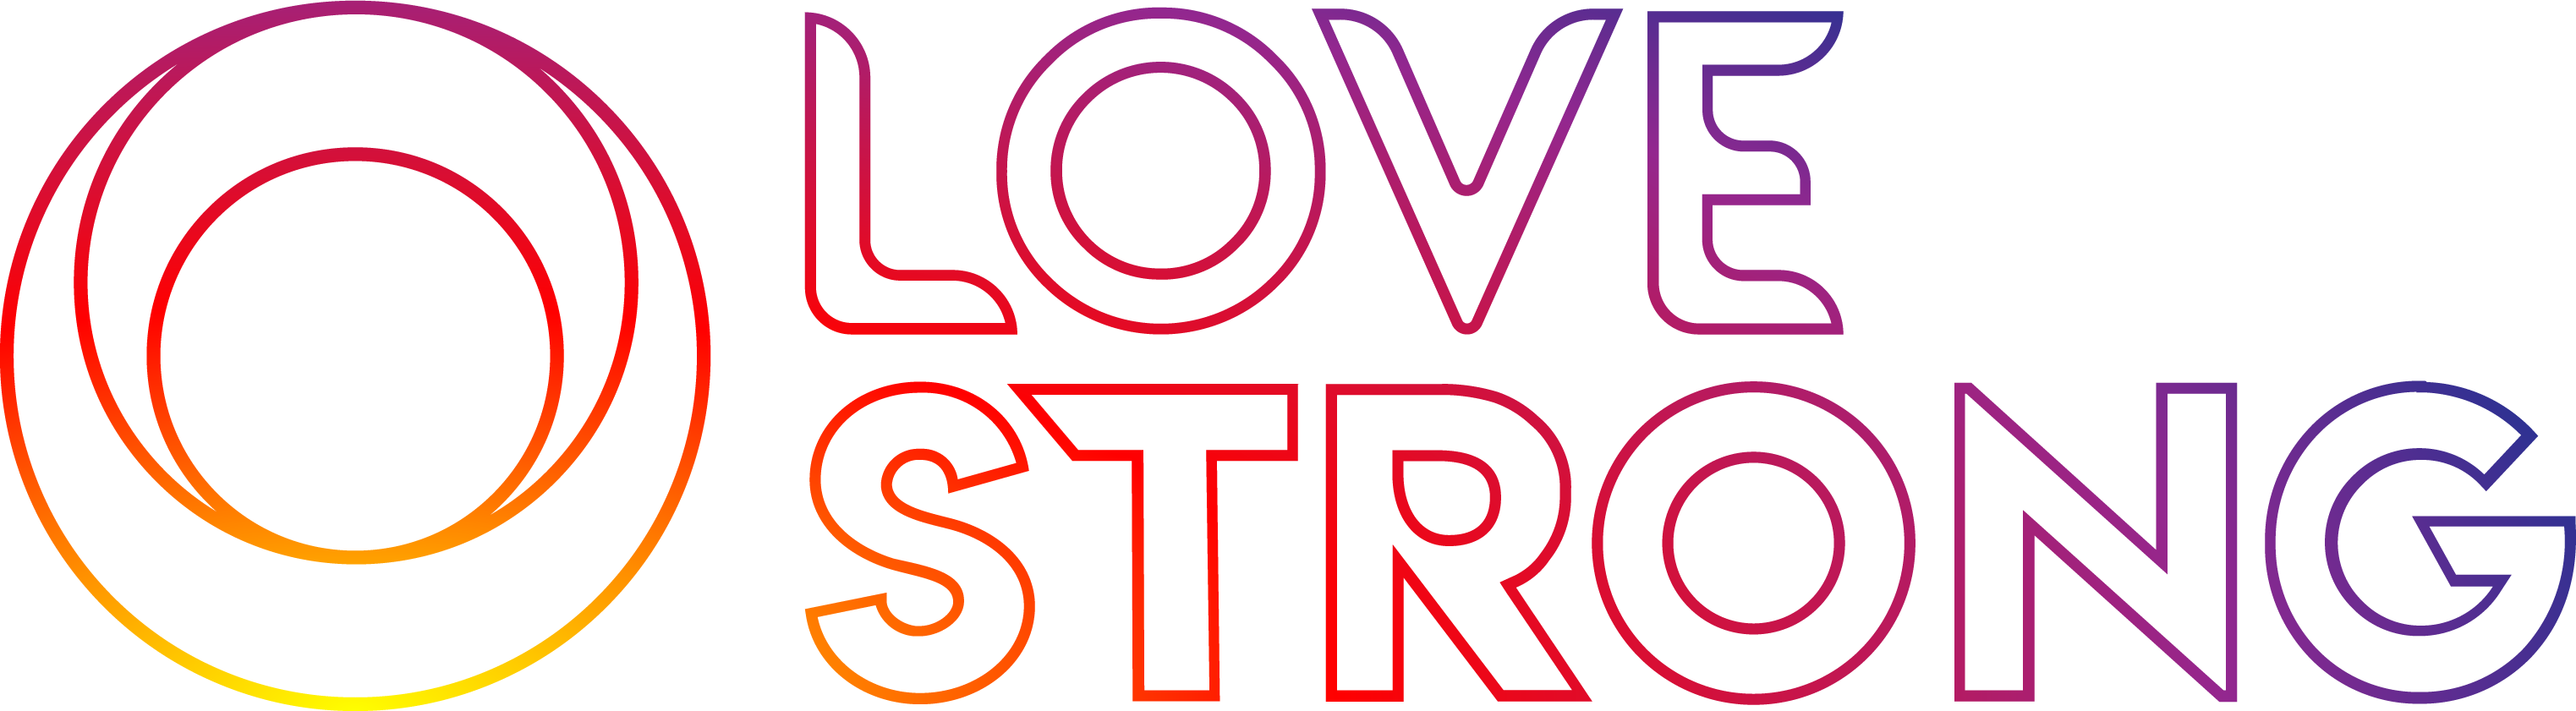 a sunrise within the love strong logo.